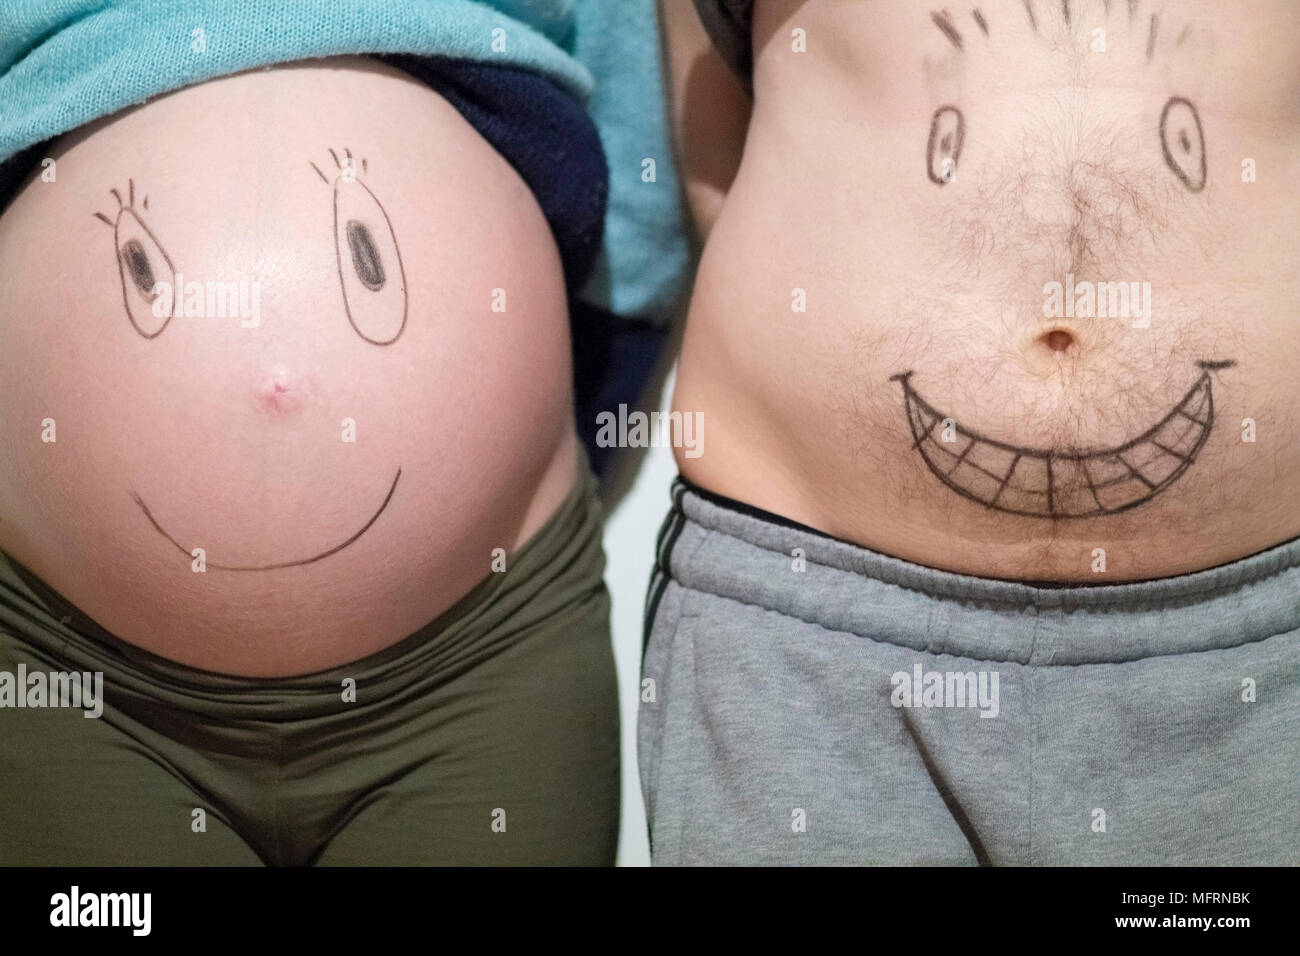 Smiley Face Baby High Resolution Stock Photography and Images - Alamy